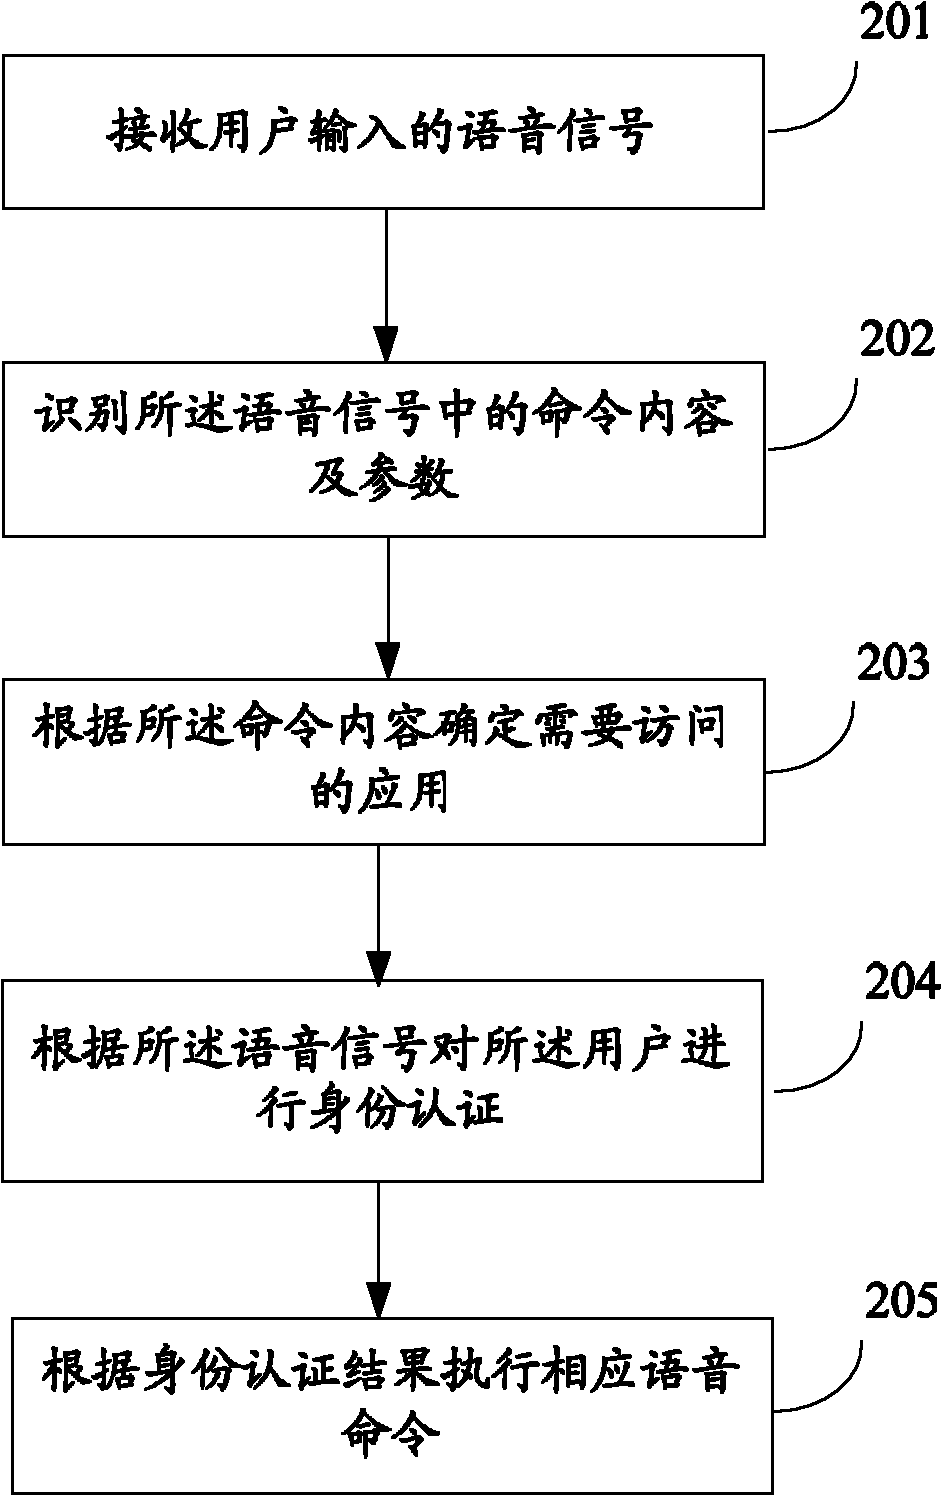 Personal assistant application access method and system